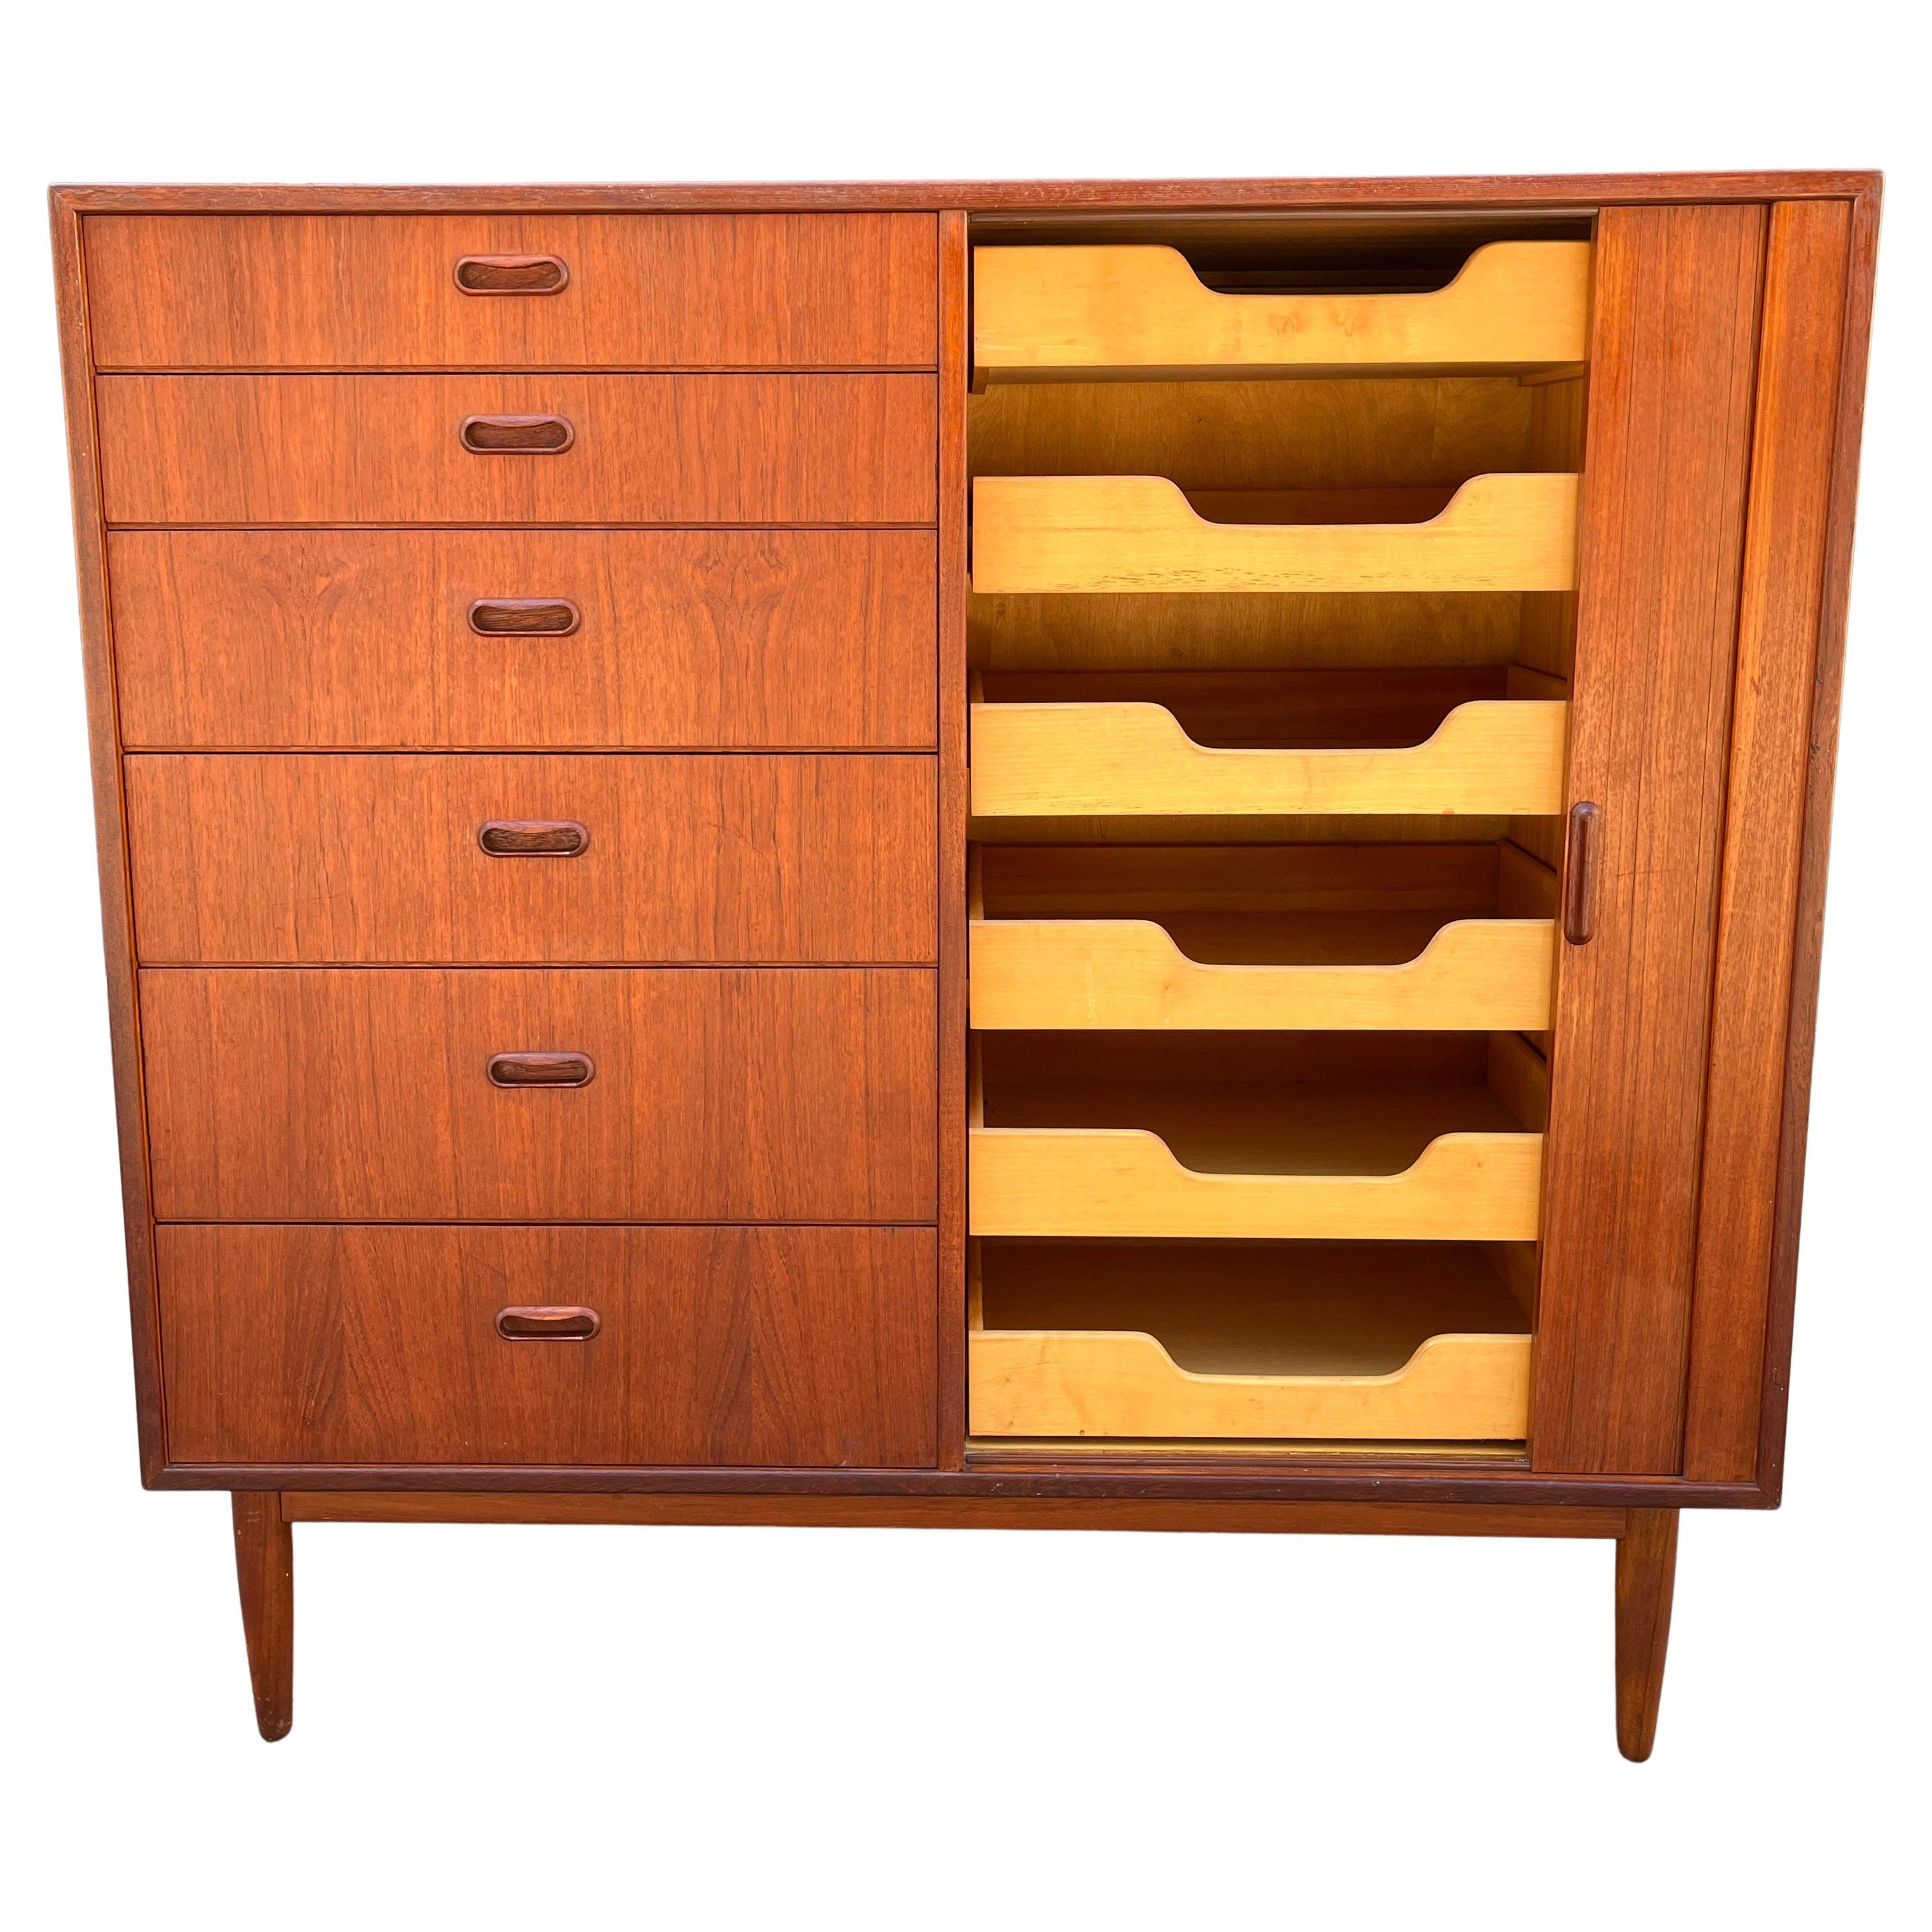 Wonderful teak wood tall boy gentleman's chest featuring 12 drawers total. Left side having signature oval inset pulls and the other half having shallow pull-out drawers concealed behind a tabour door. Resting on tapered solid teak legs. Showing a